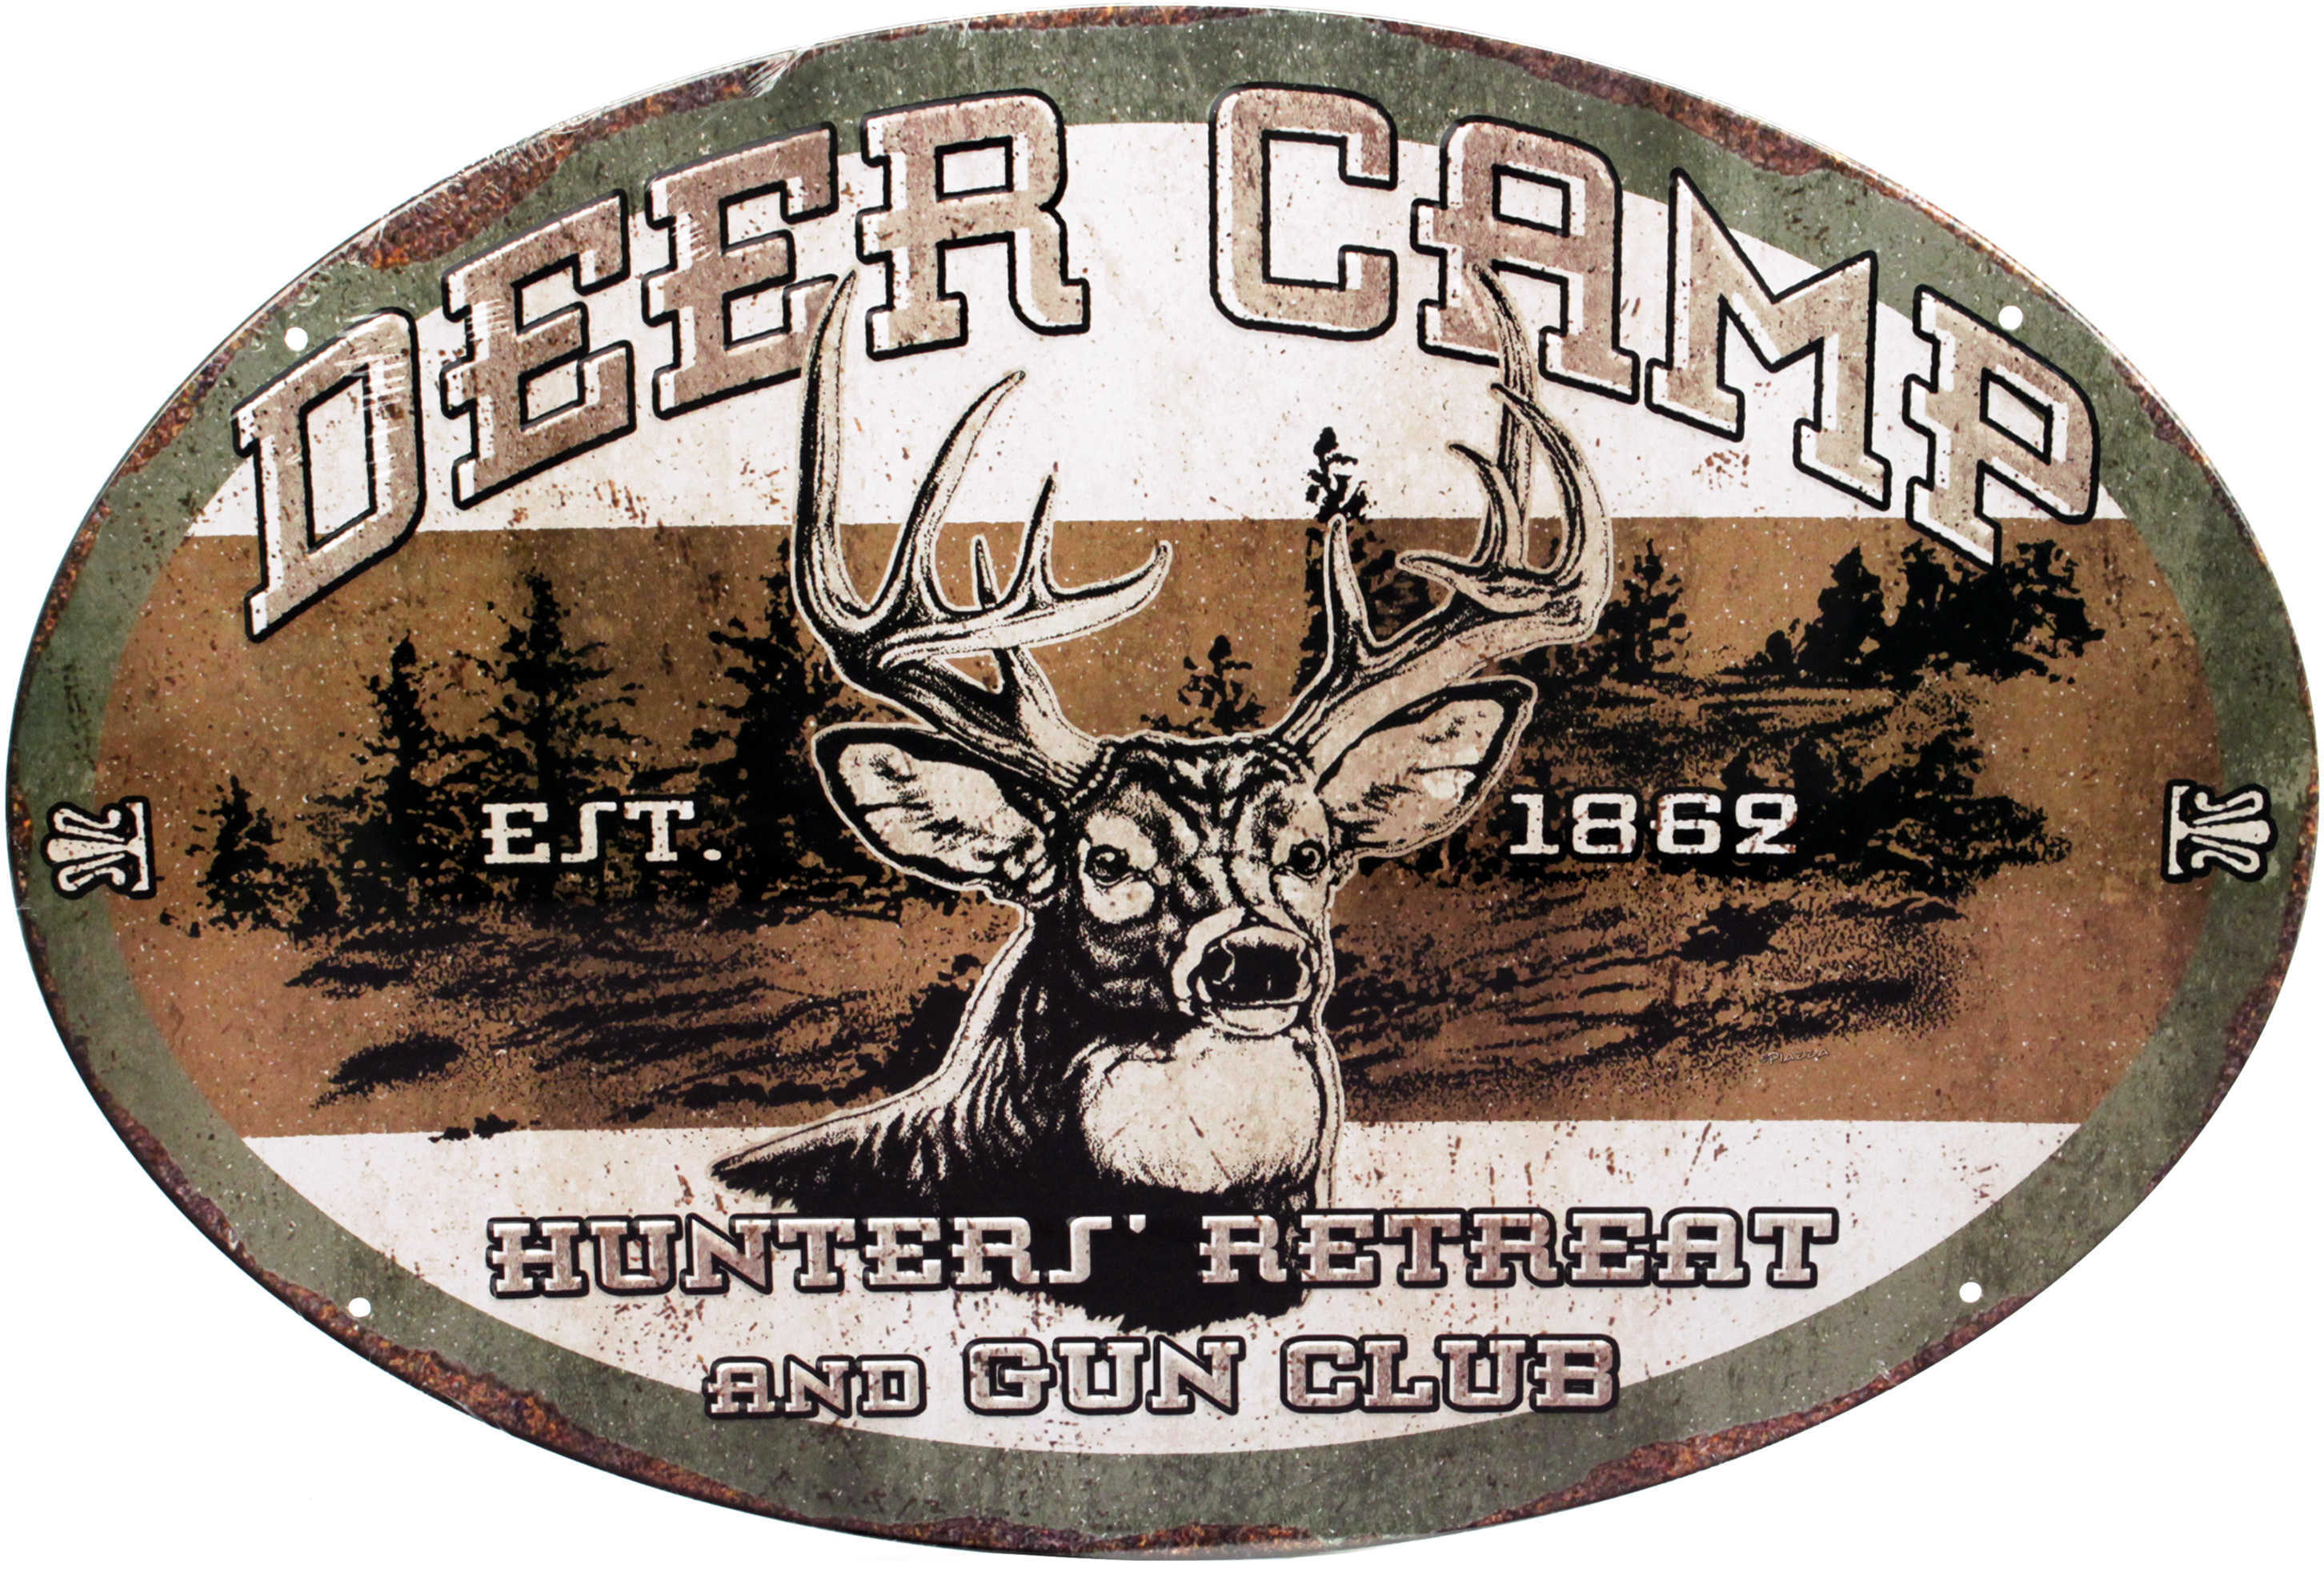 Rivers Edge Products 12" x 17" Tin Sign Deer Camp 1535